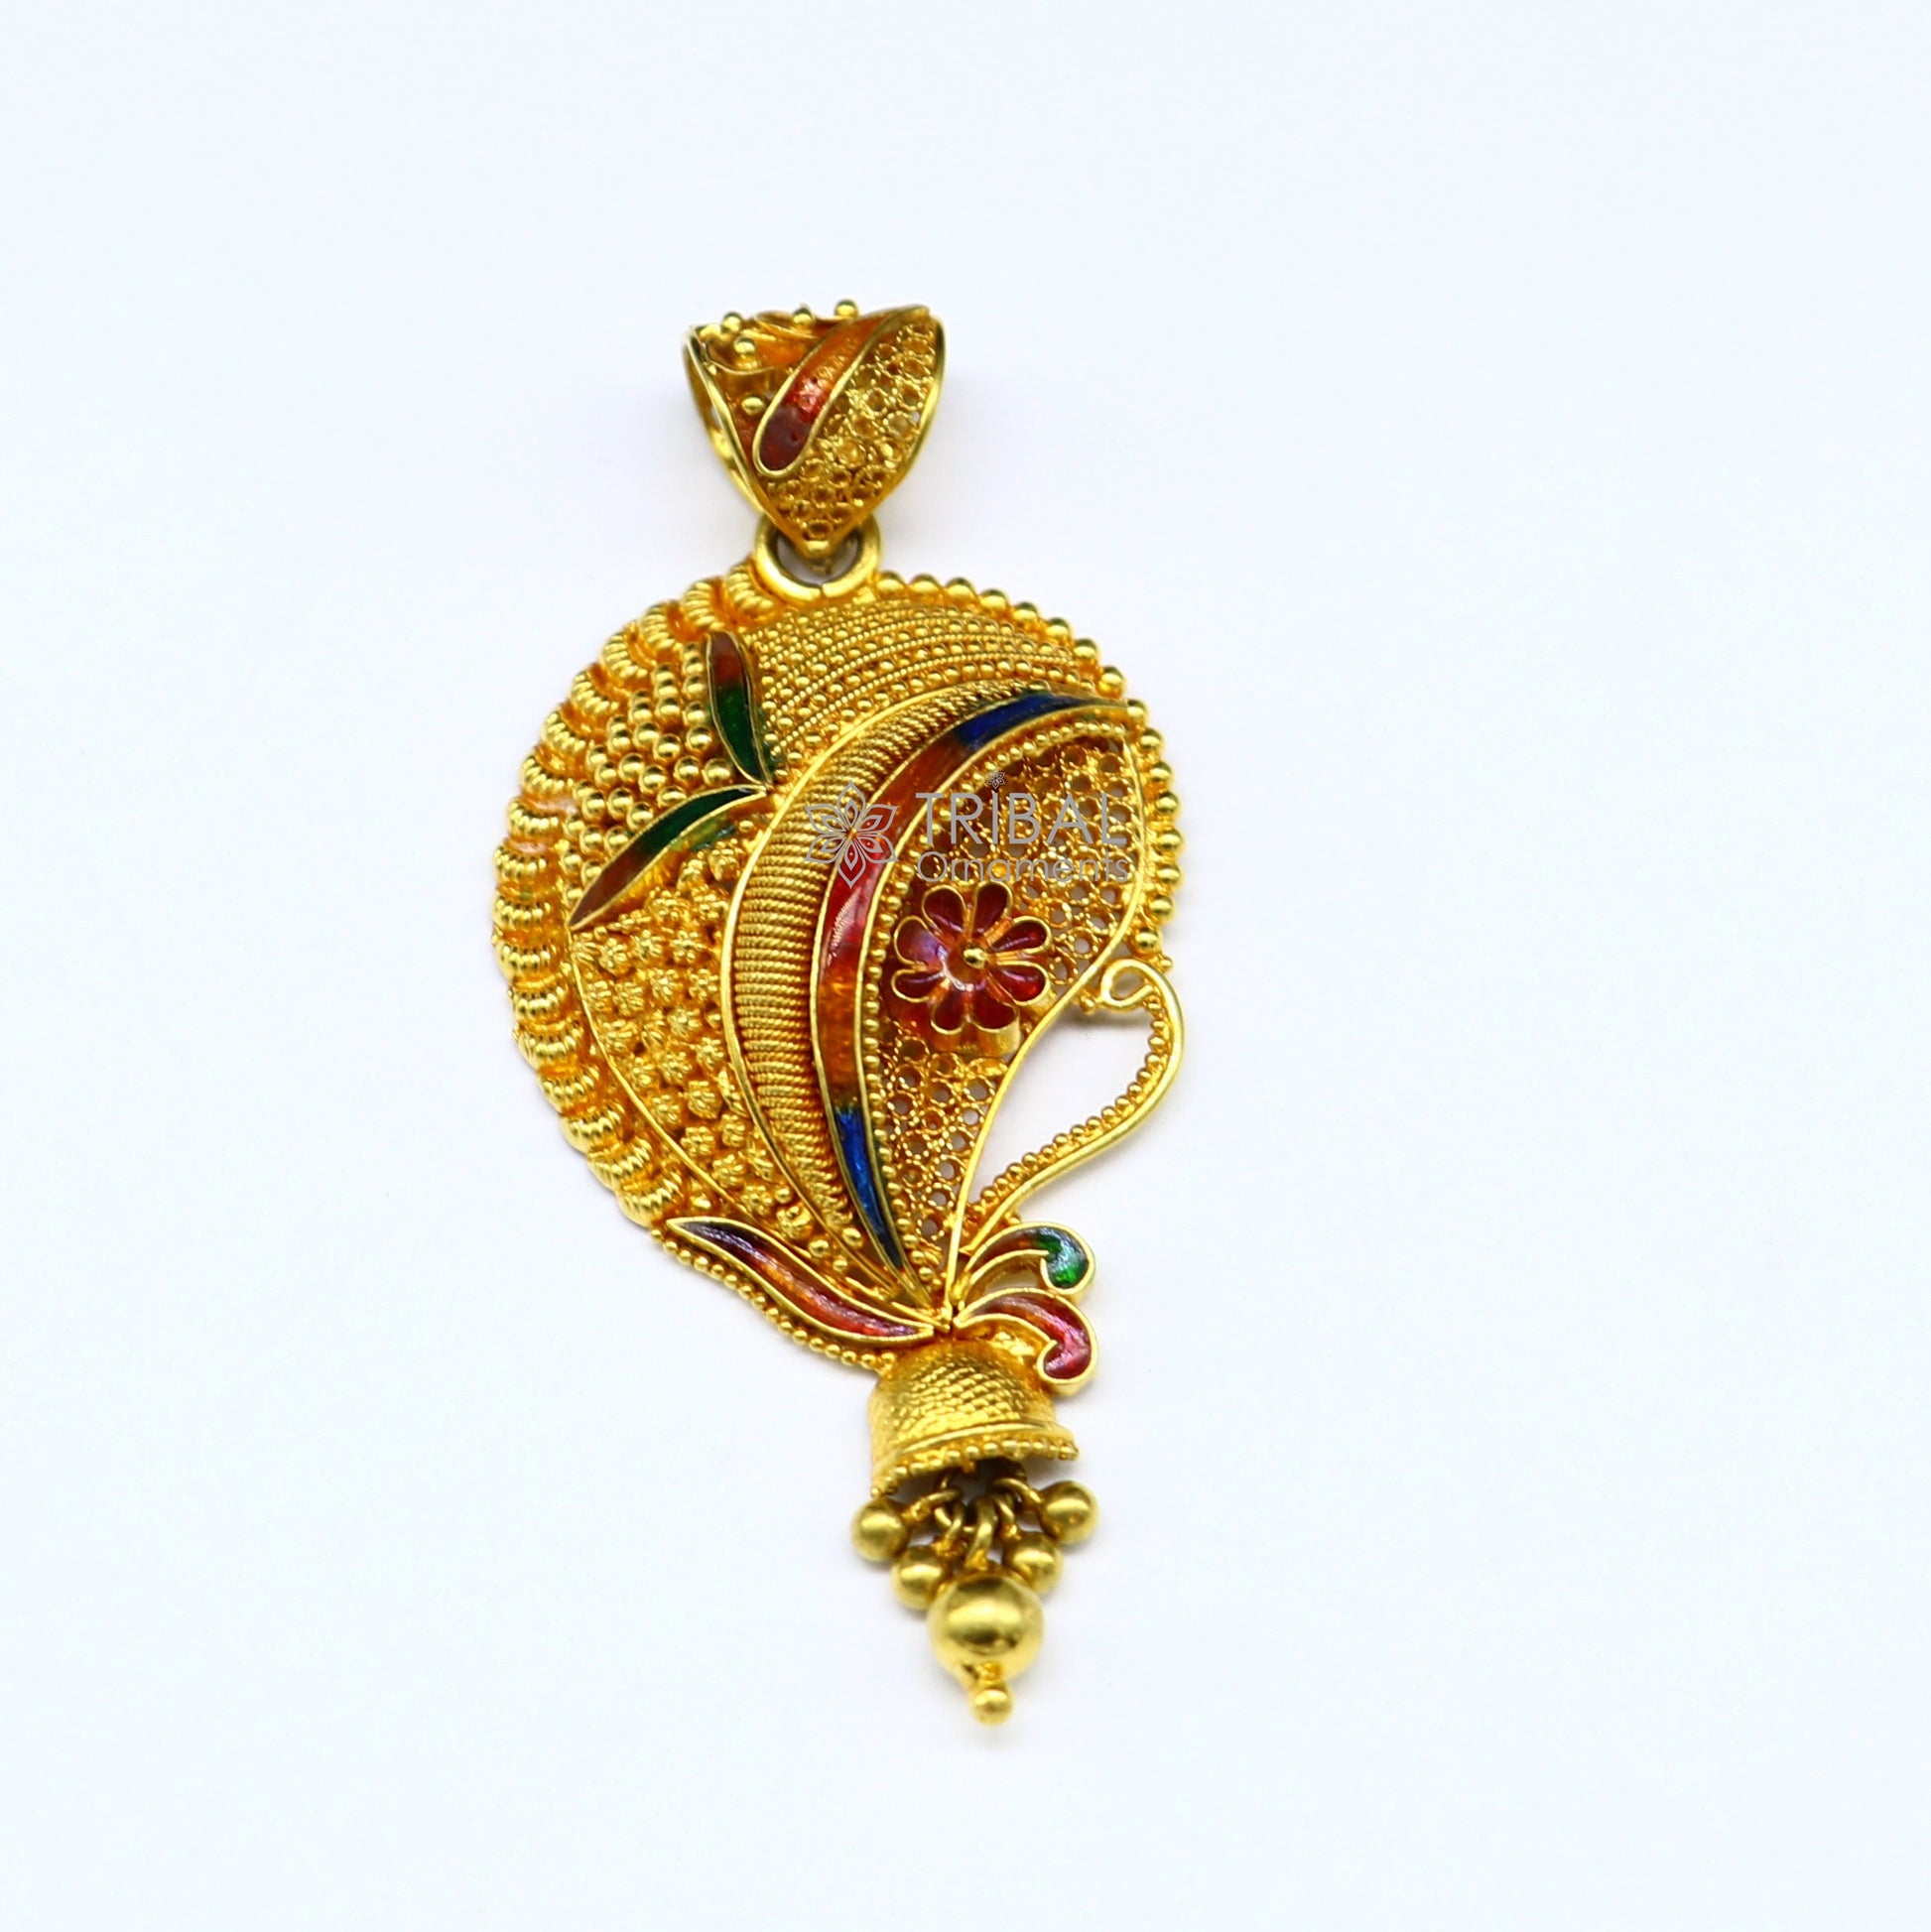 Handcrafted Traditional cultural filigree work trendy 22kt yellow gold unique functional pendant, amazing ethnic brides pendant jewelry gp24 - TRIBAL ORNAMENTS